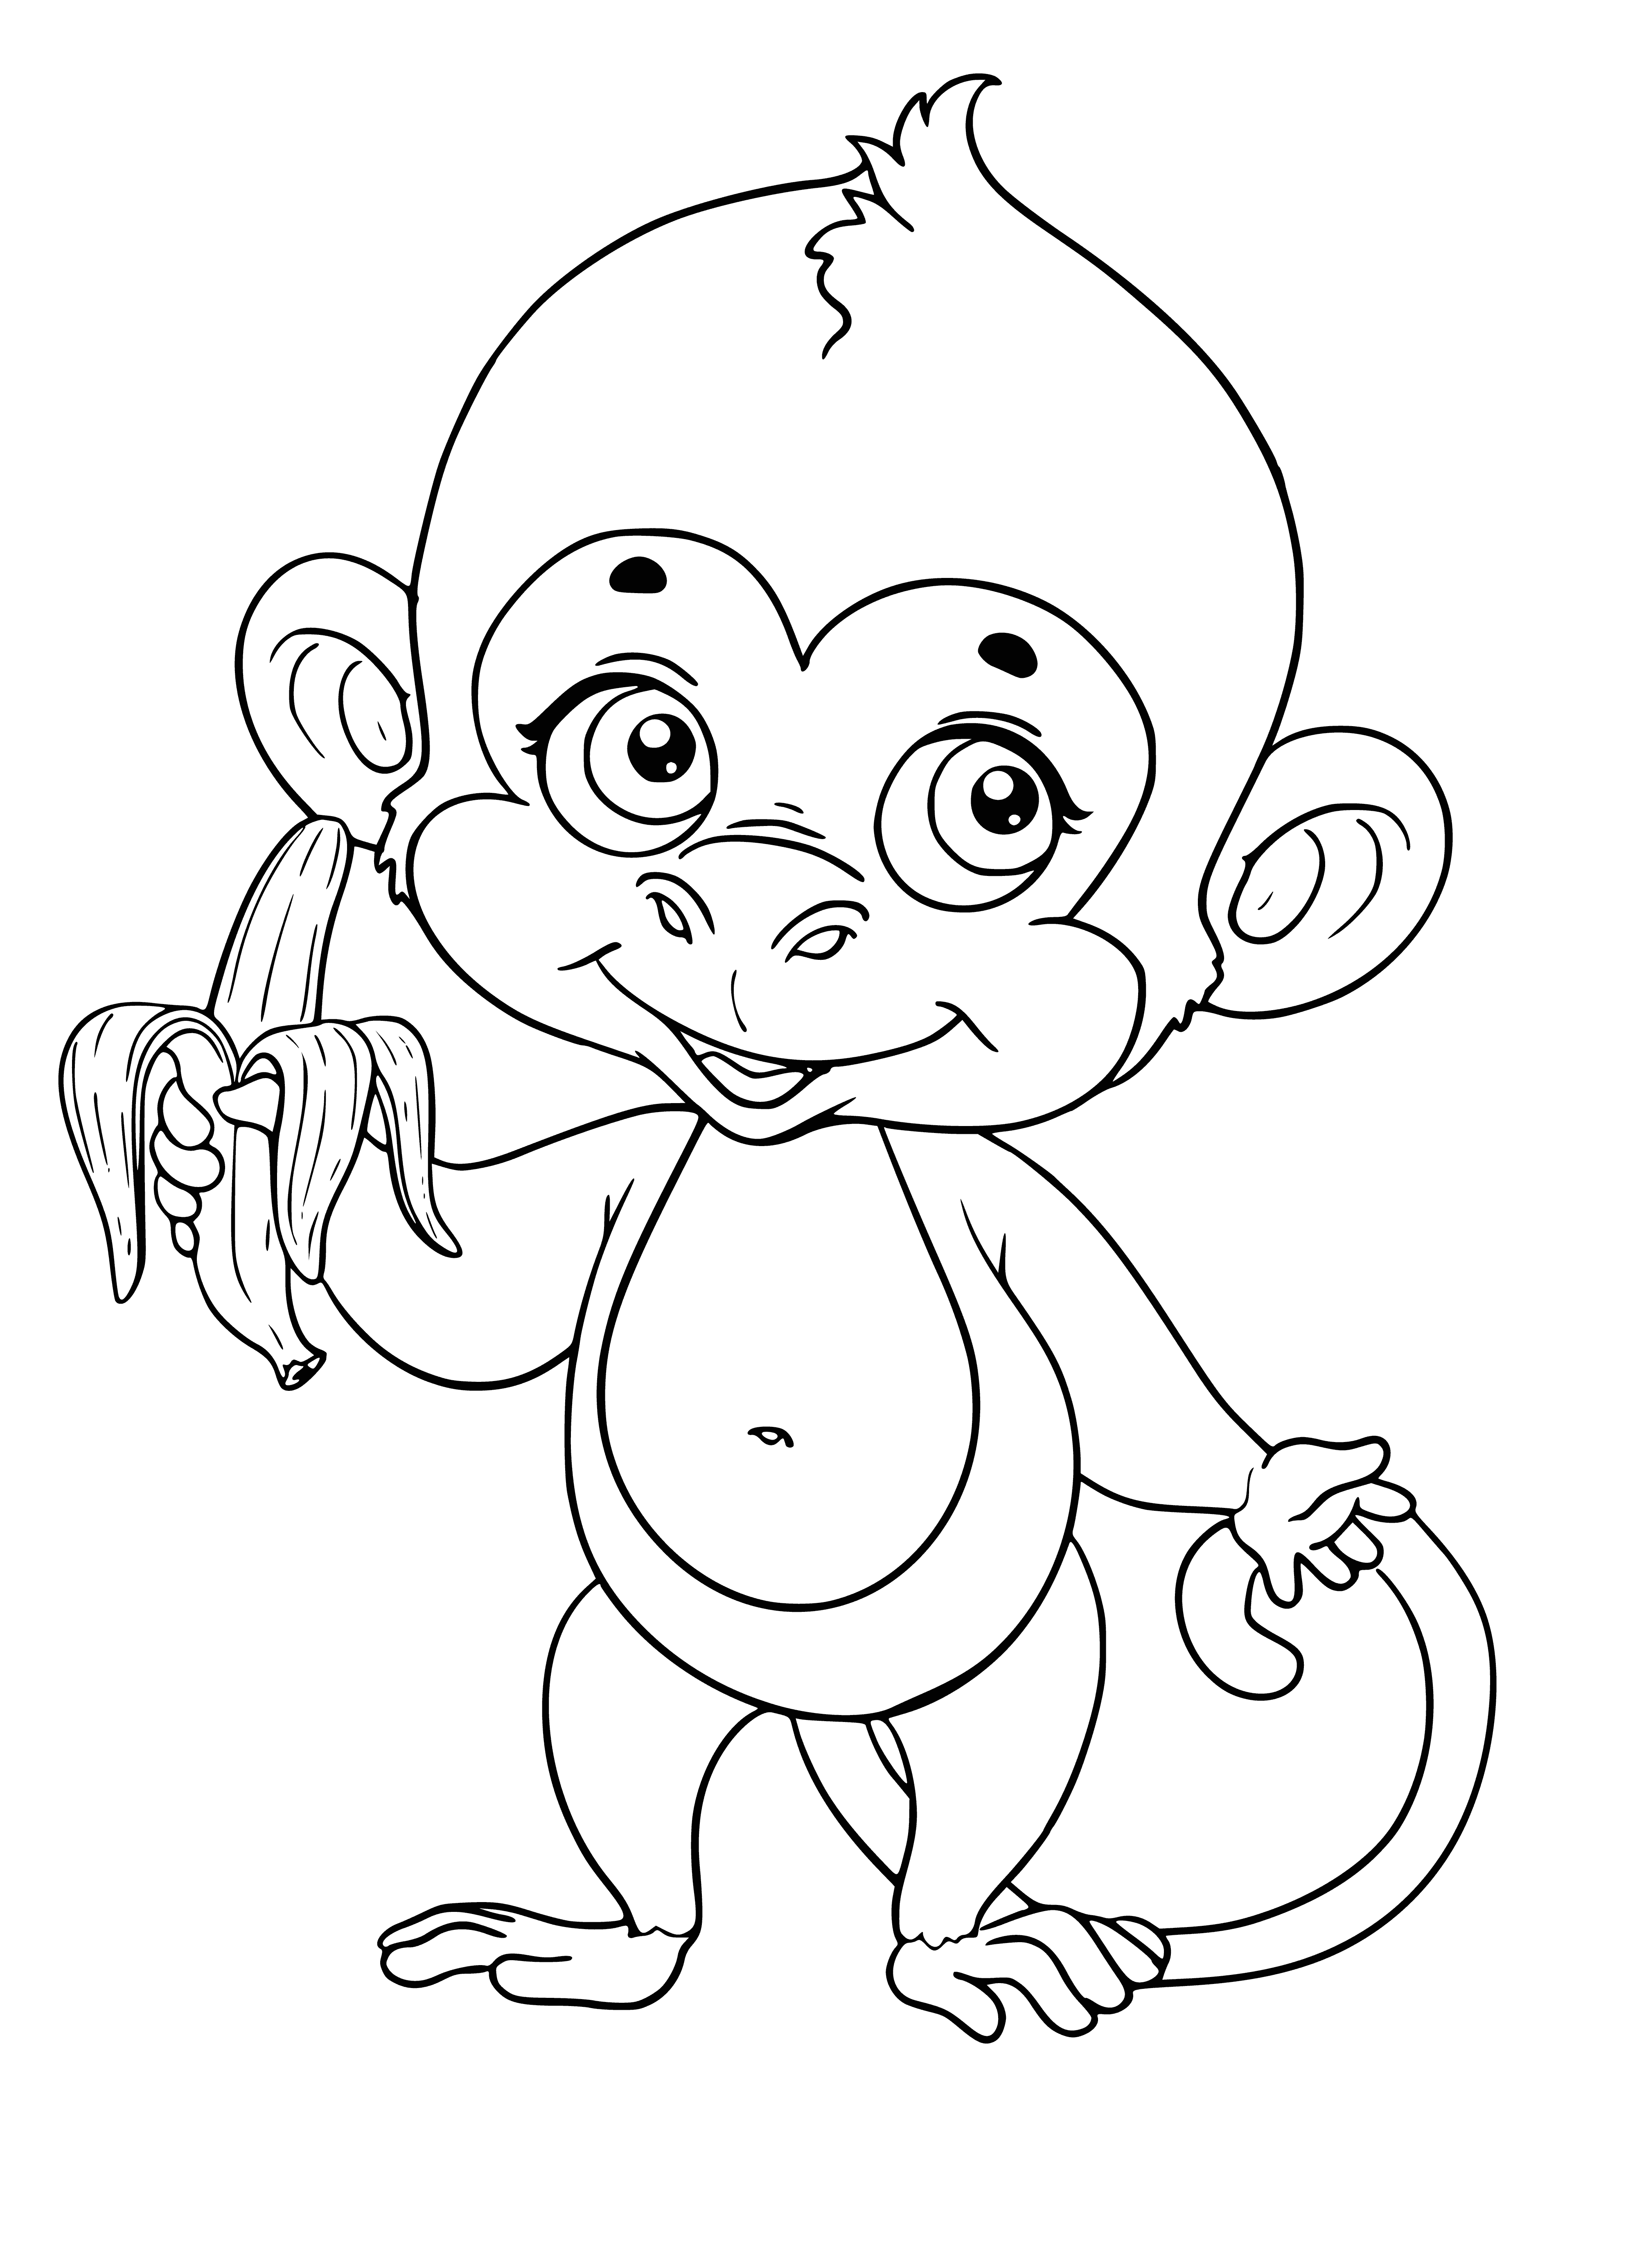 coloring page: A monkey with a banana - brown monkey with a yellow banana, brown peel. #coloringpage